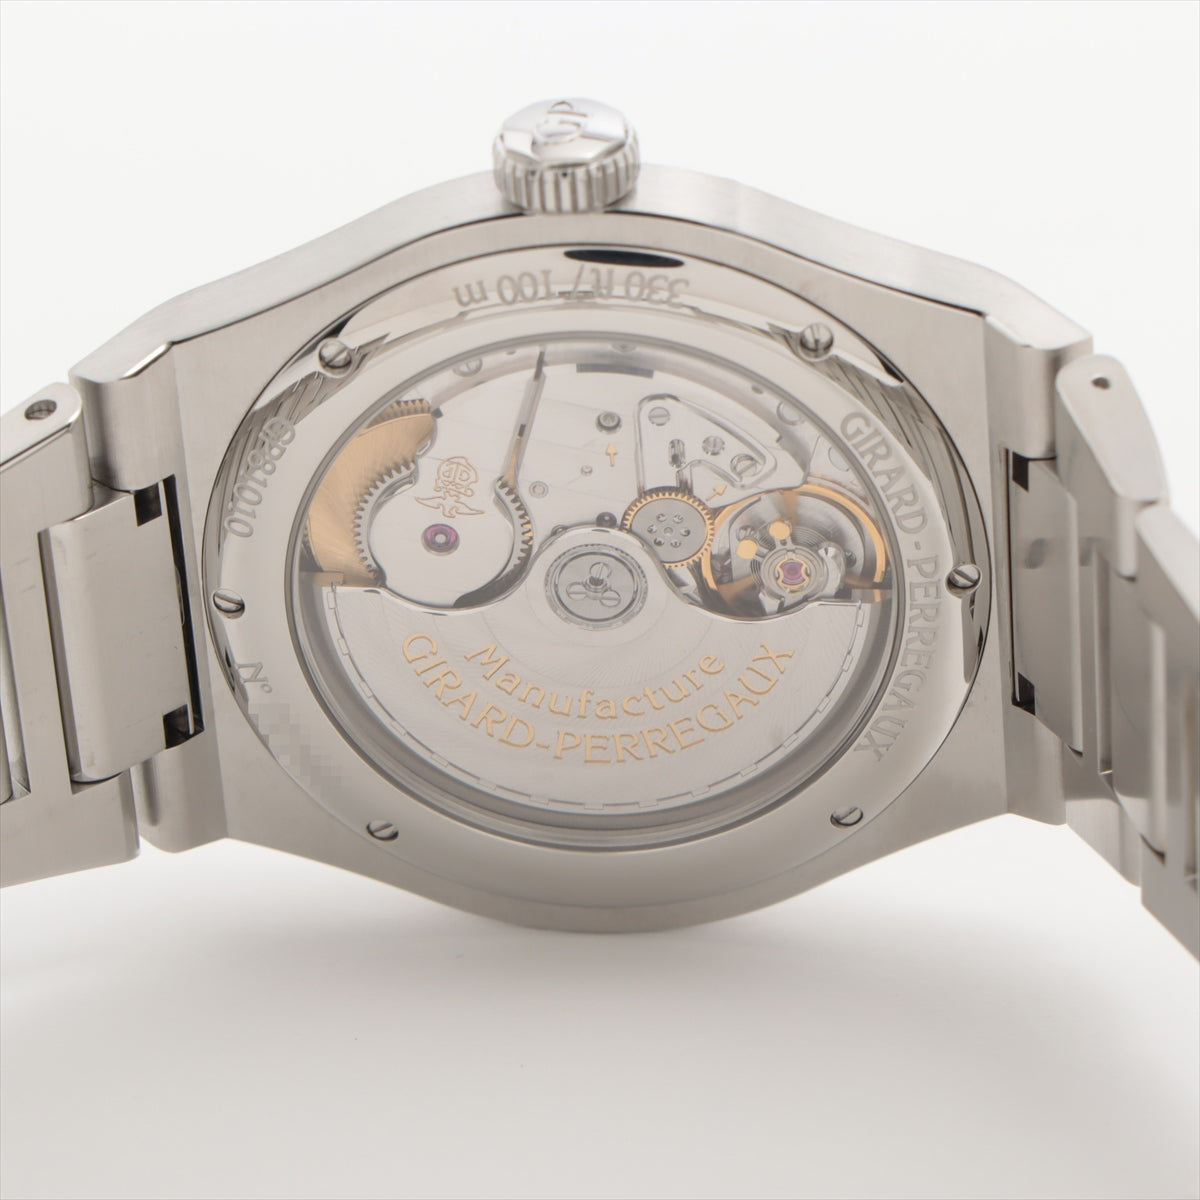 Giral Pergo Loreart 81010-11-131-11A SS AT Silver Character Panerai Too Much 2 es